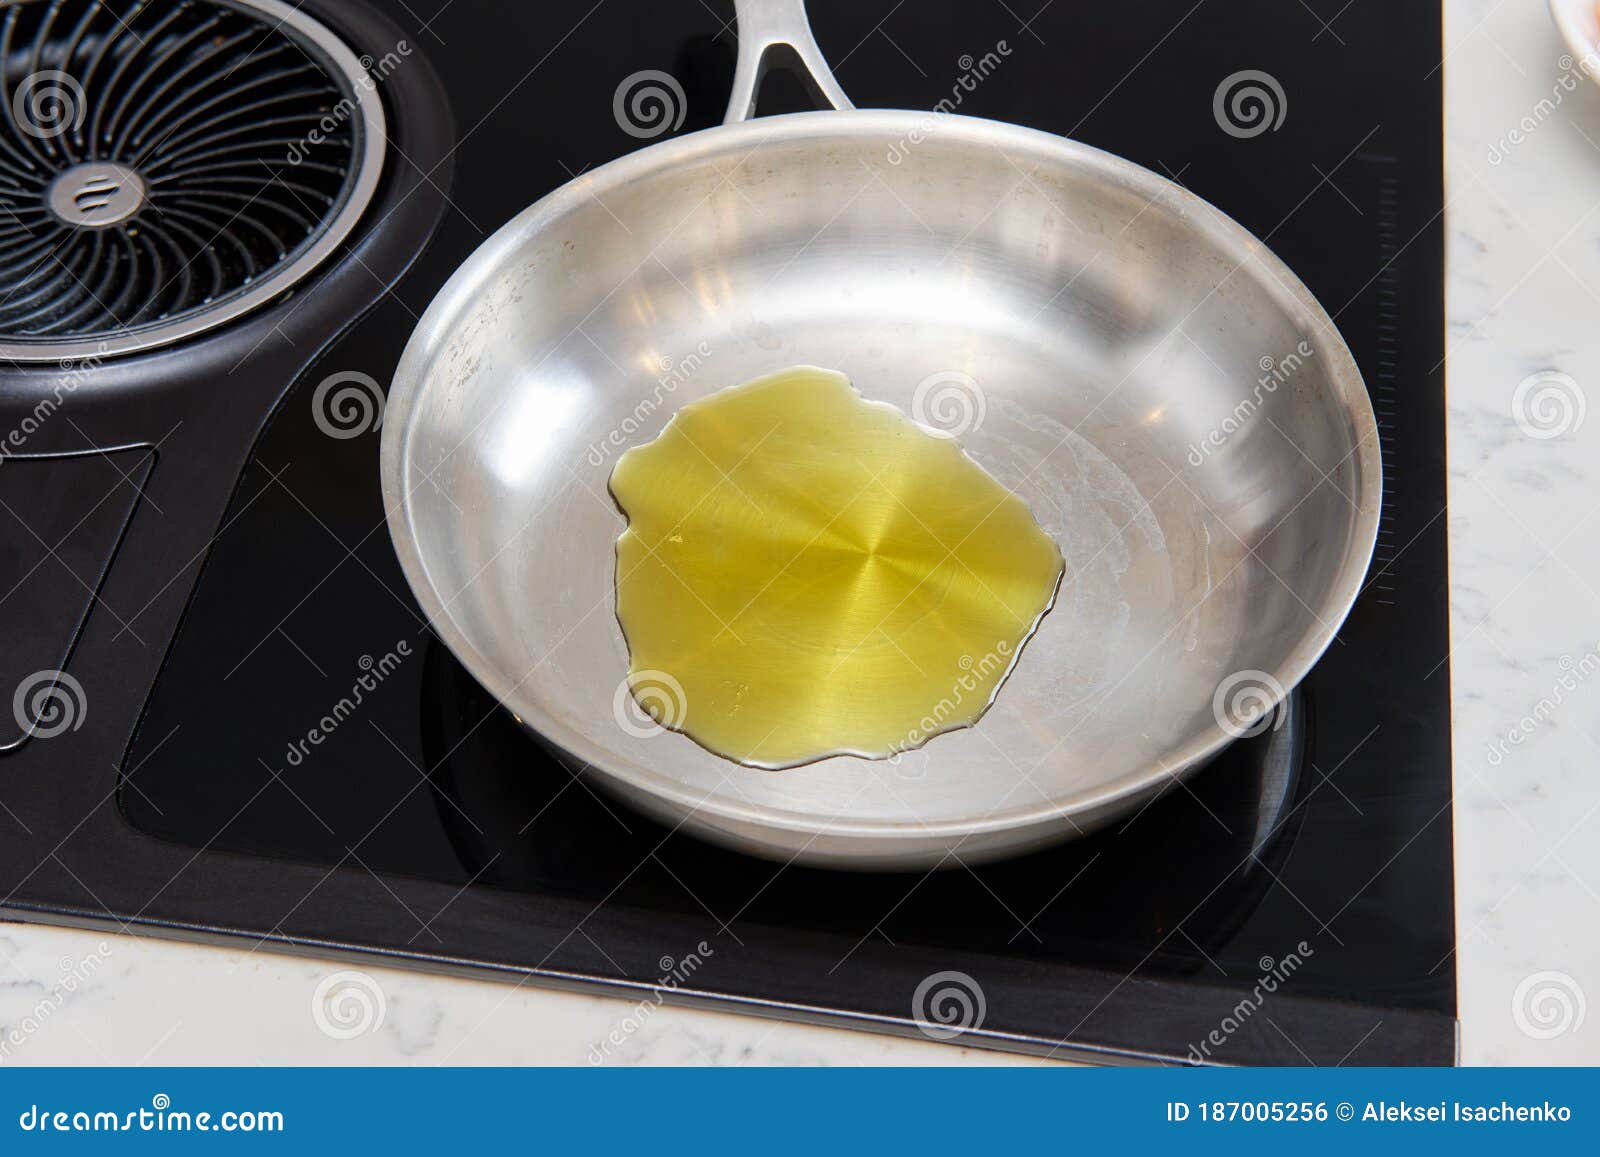 Frying Pan With Olive Oil On The Stove Stock Photo Image Of Food